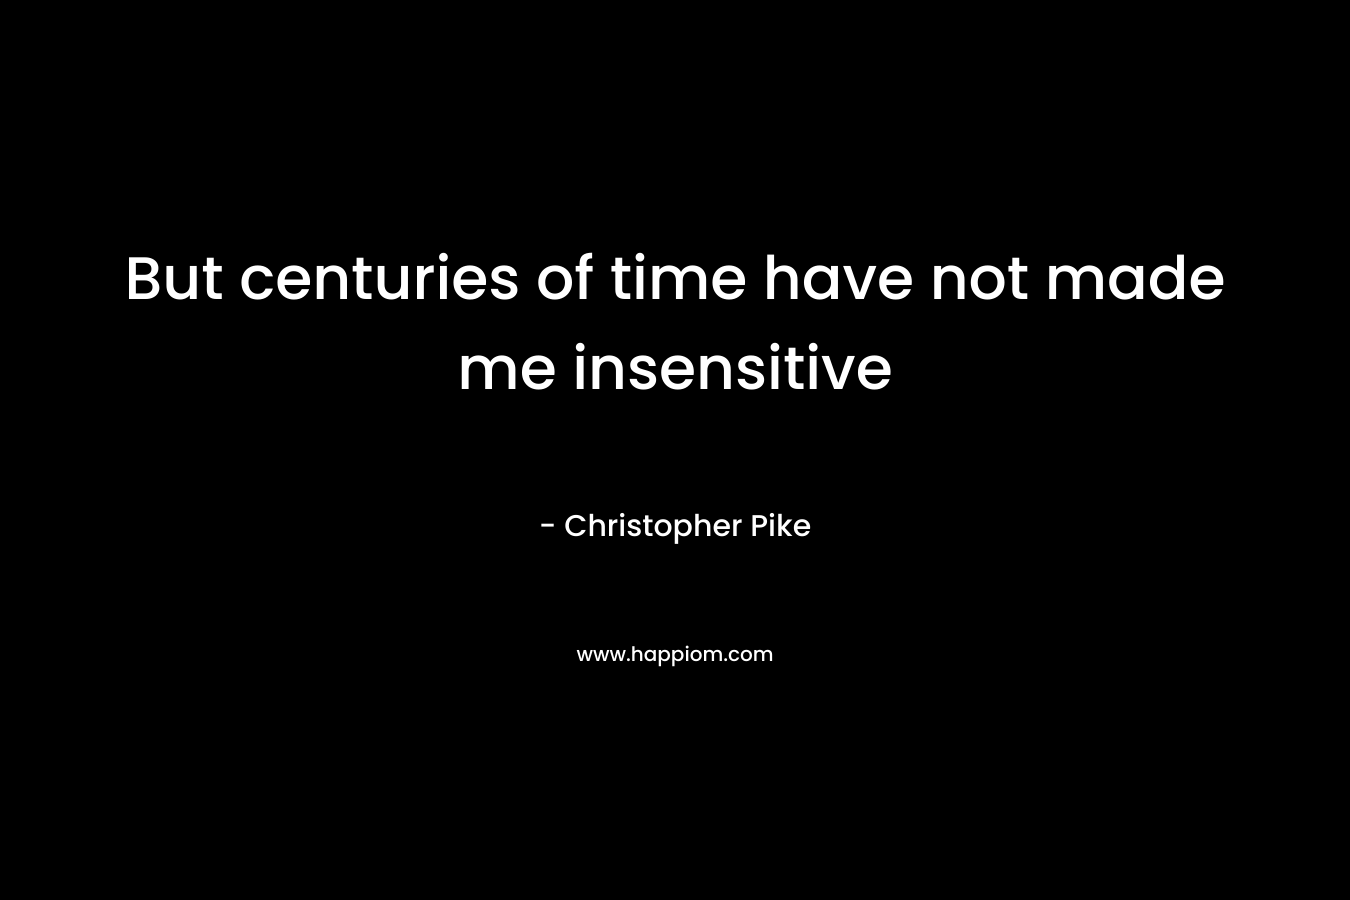 But centuries of time have not made me insensitive